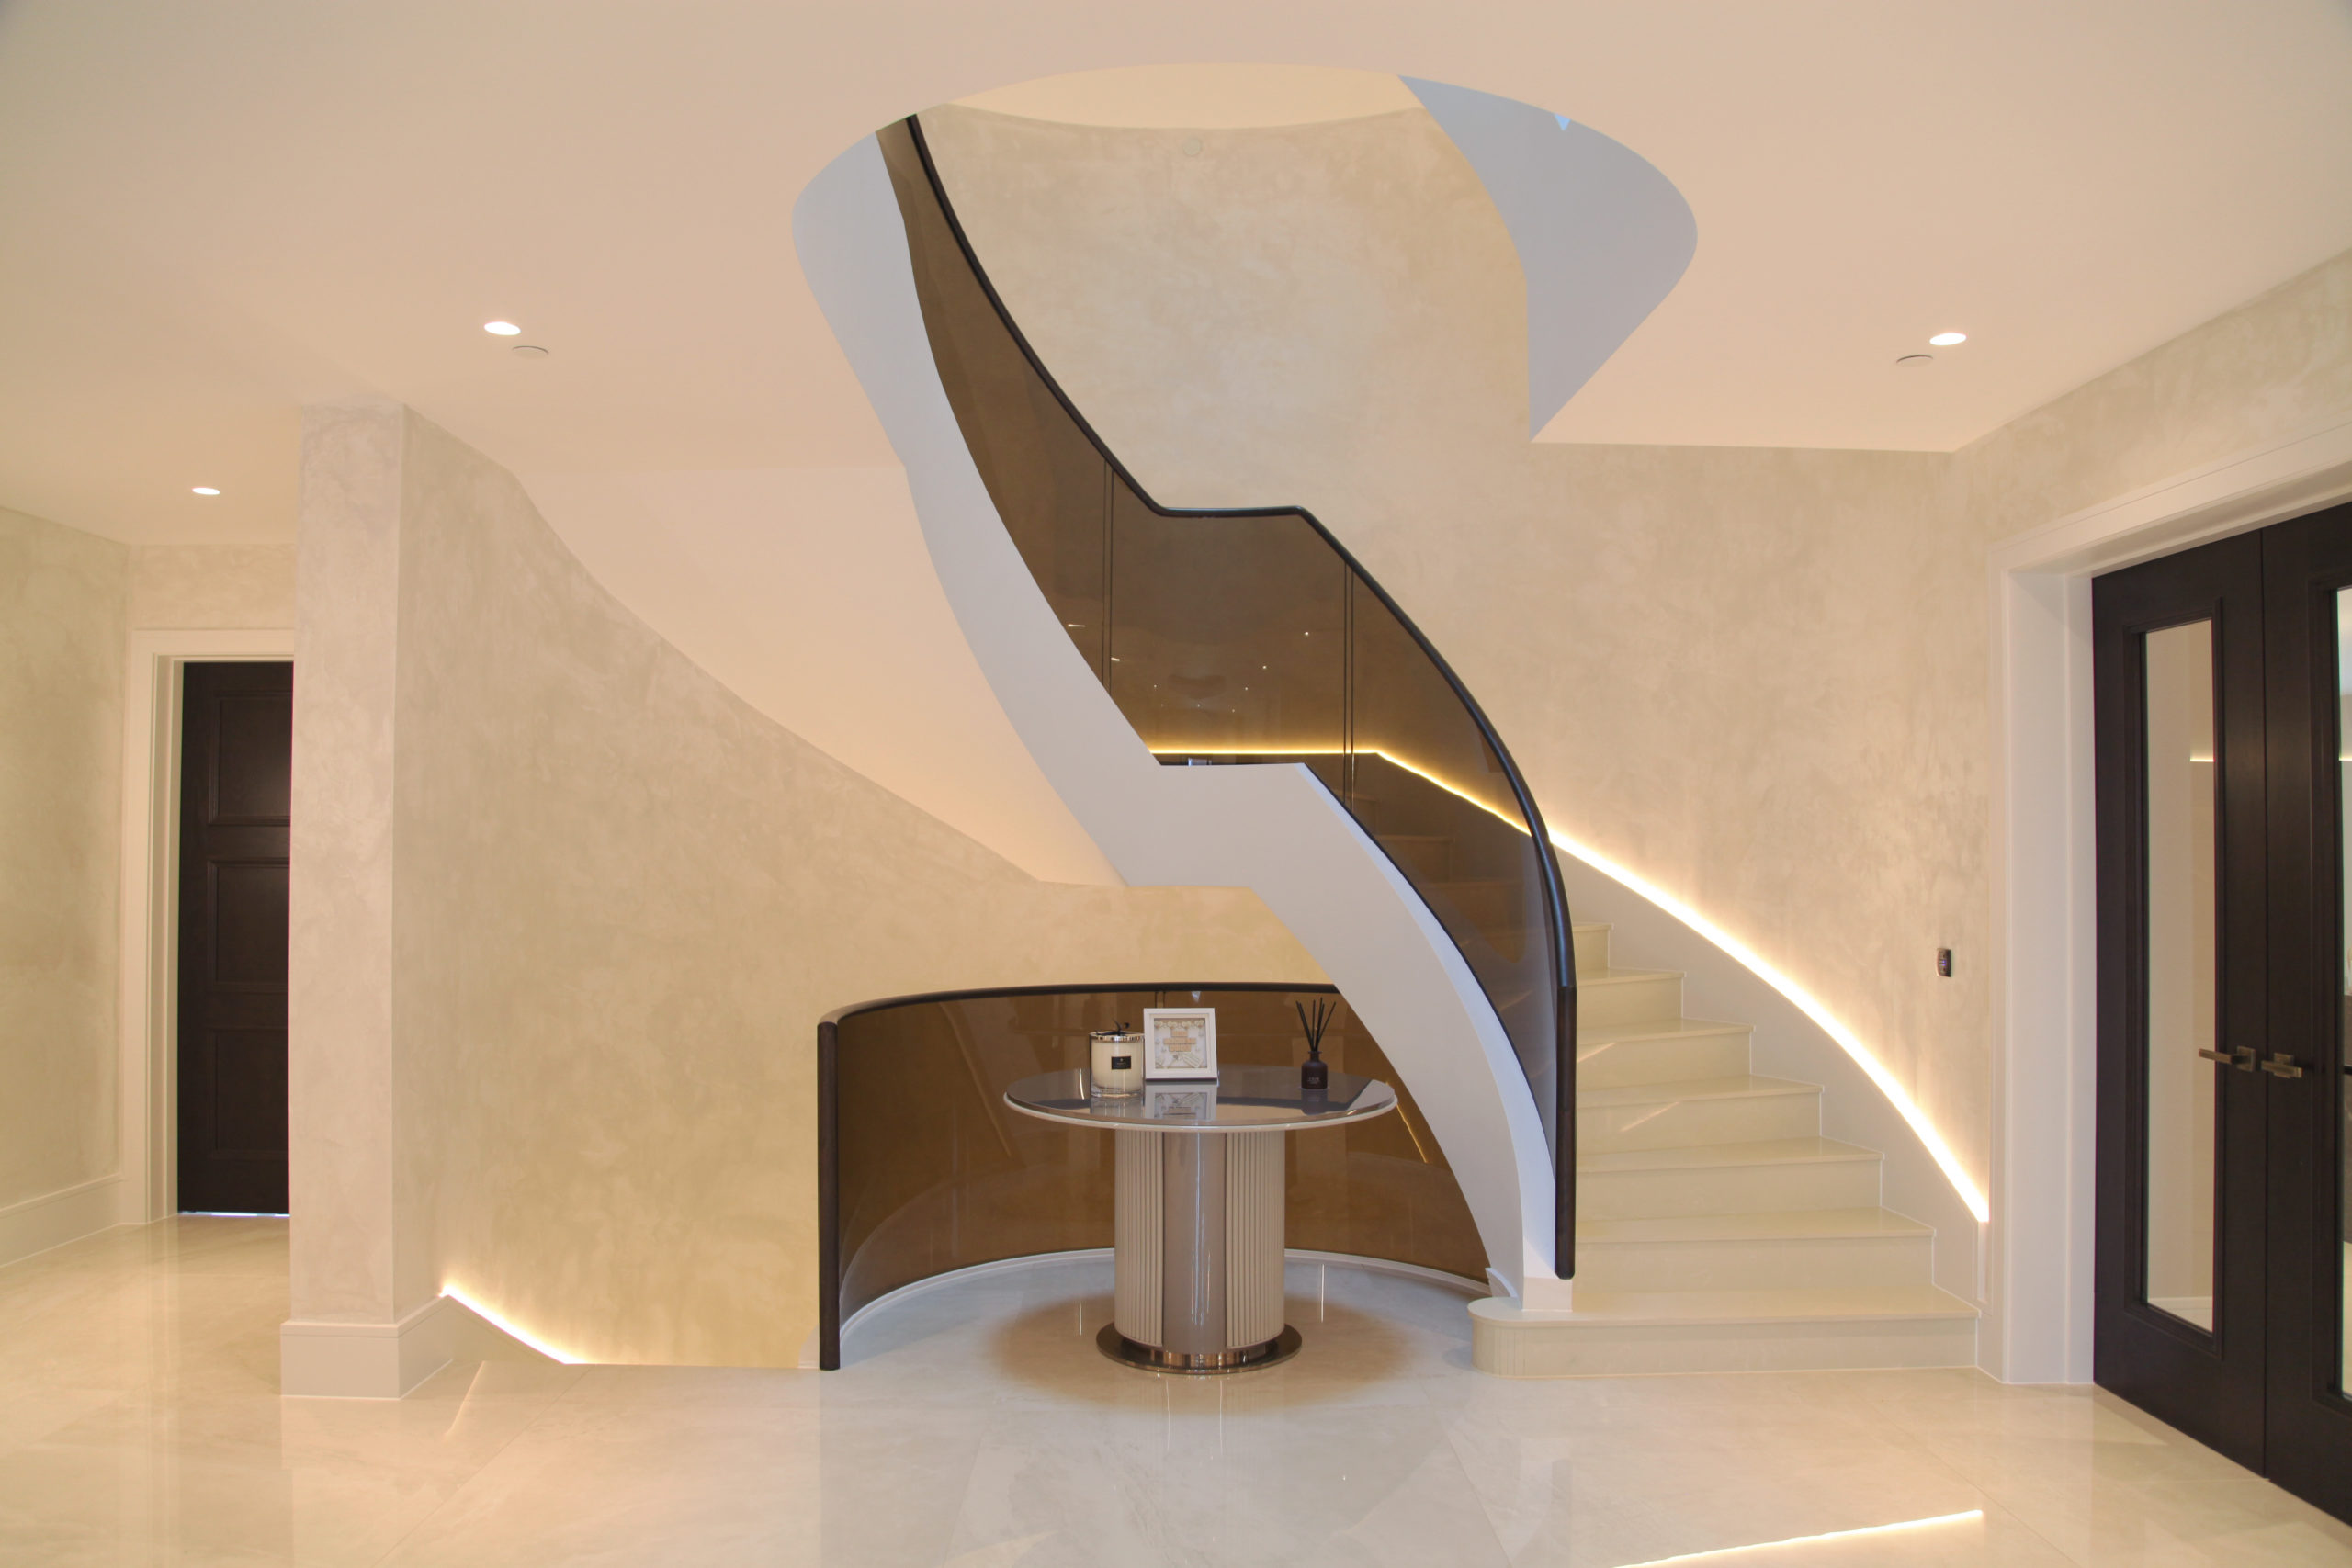 White Helical staircase complemented with tinted glass balustrade